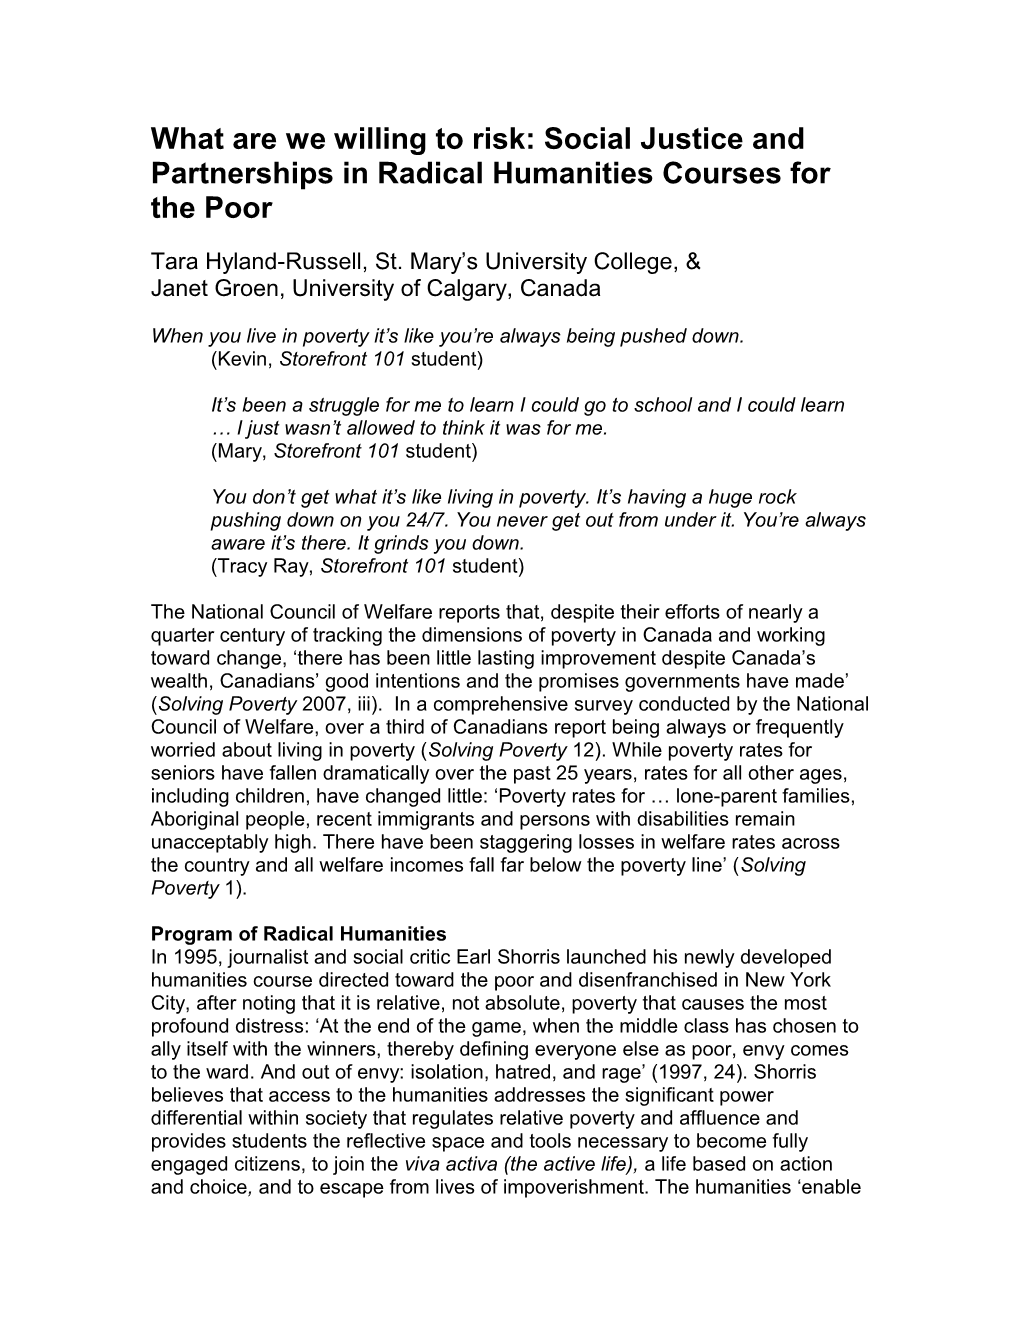 What Are We Willing to Risk: Social Justice and Partnerships in Radical Humanities Courses